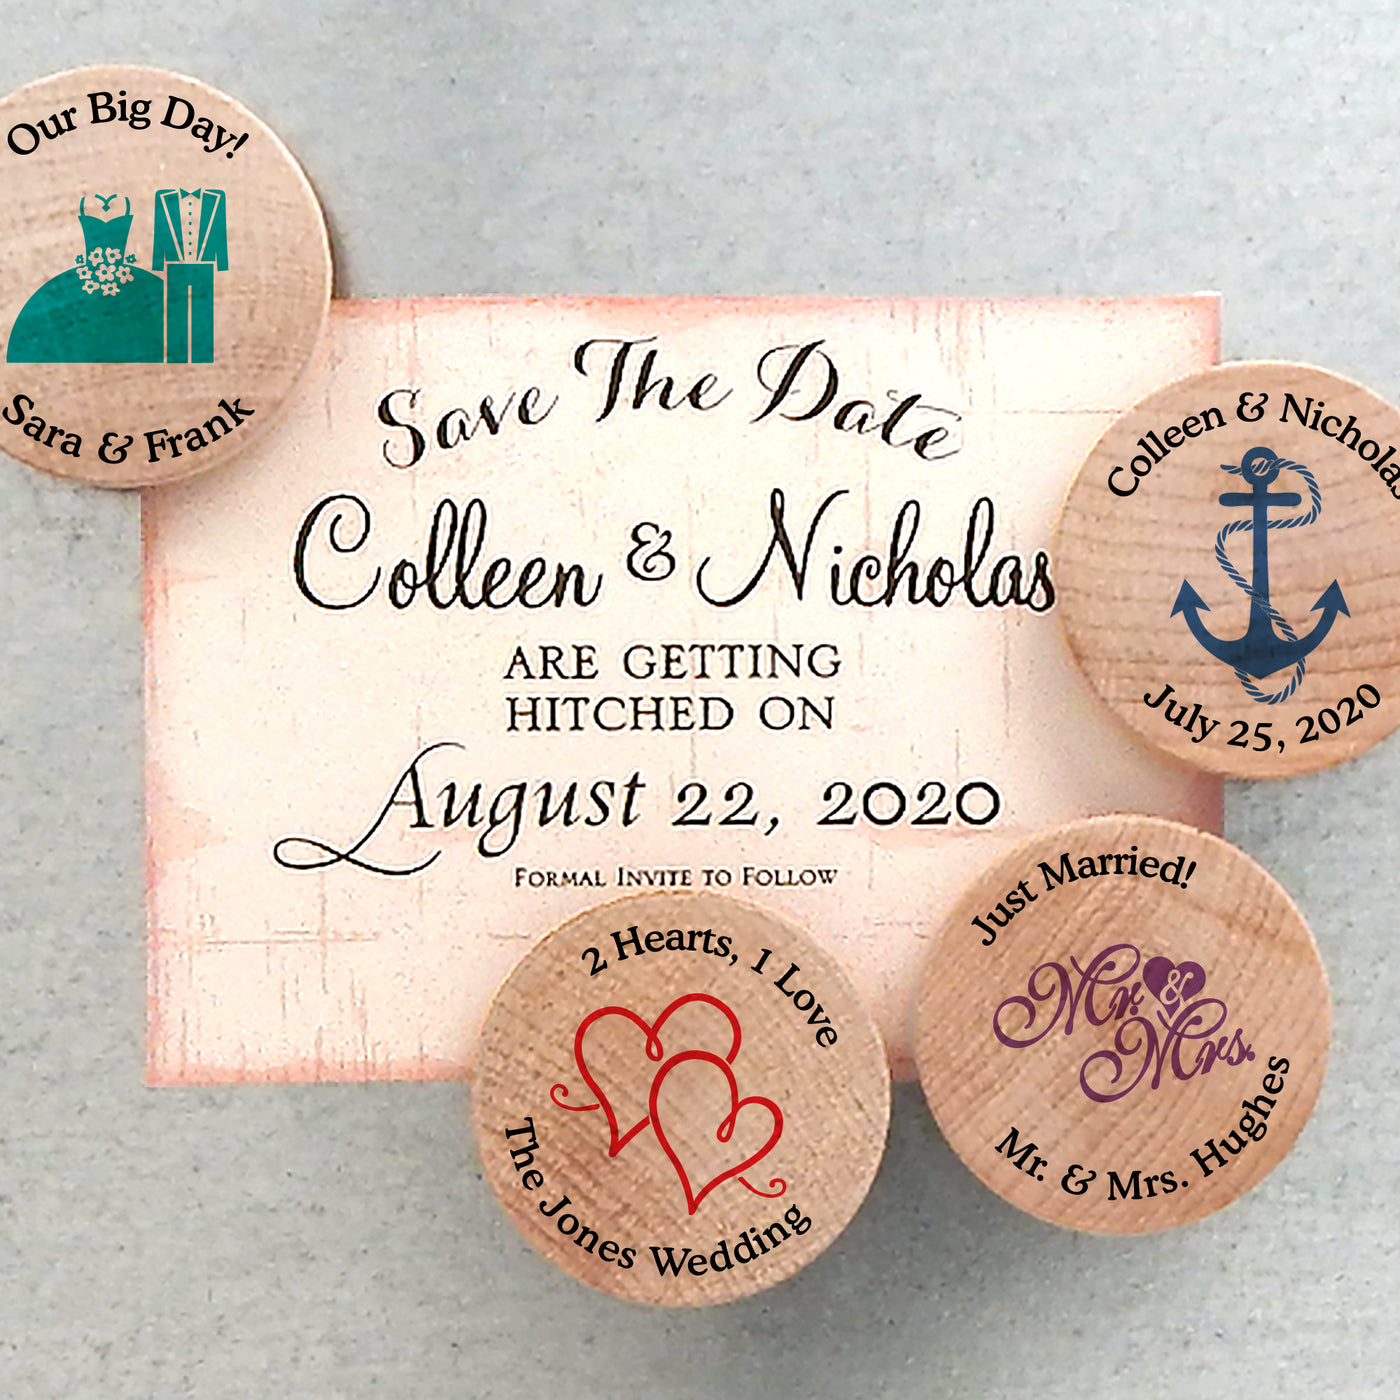 Personalized Wooden Magnets